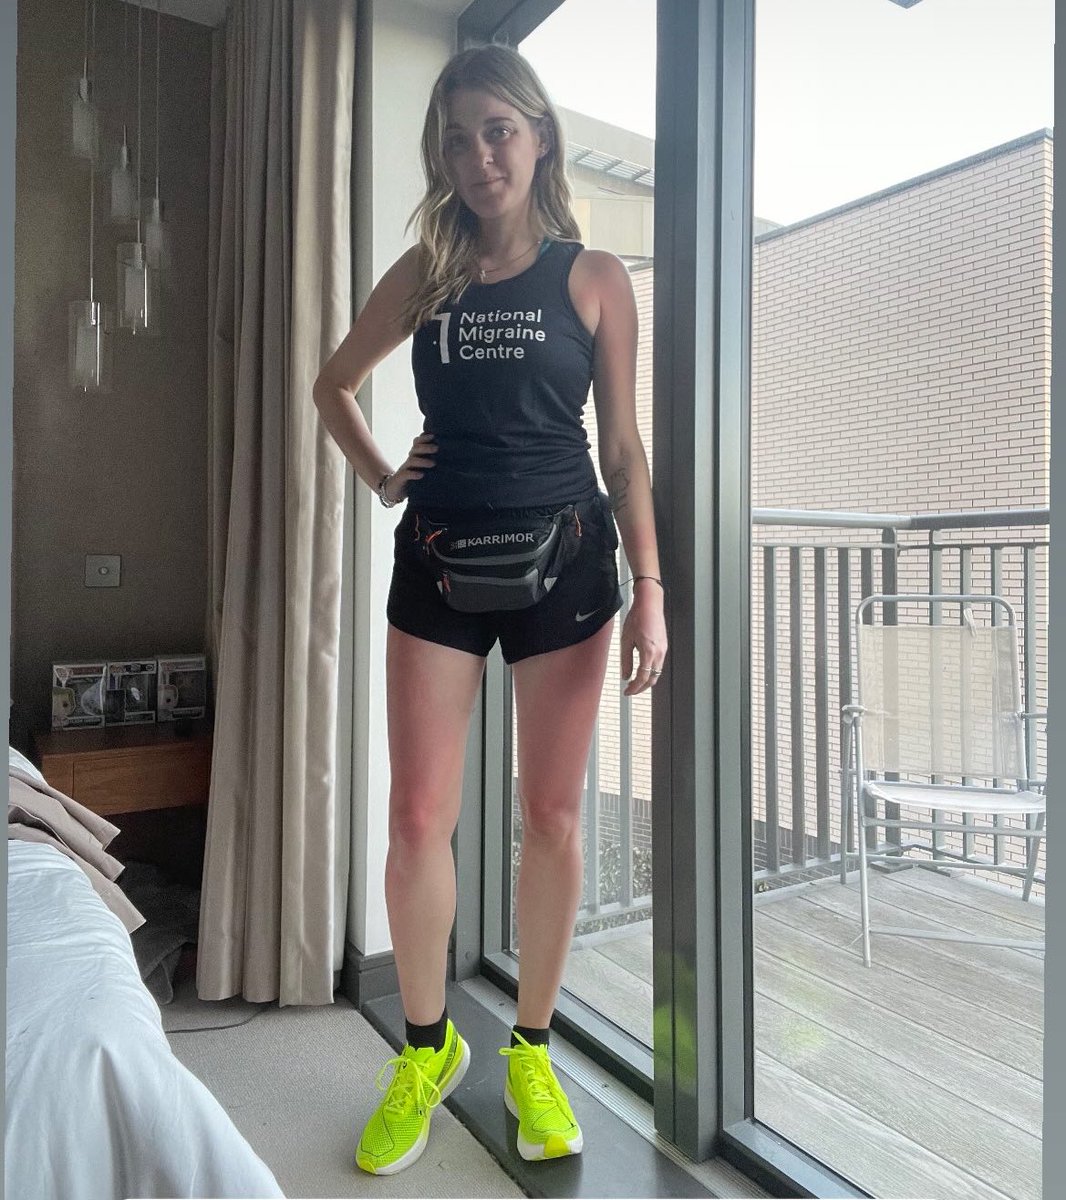 Final outfit check this evening. Now going to curl my sunburnt legs up in bed ready for the @LondonMarathon tomorrow! I’ll be proudly wearing my @NatMigraineCtr top. And there’s still time to donate to this brilliant charity using the link below 👇🏻 2024tcslondonmarathon.enthuse.com/pf/dehanna-dav…